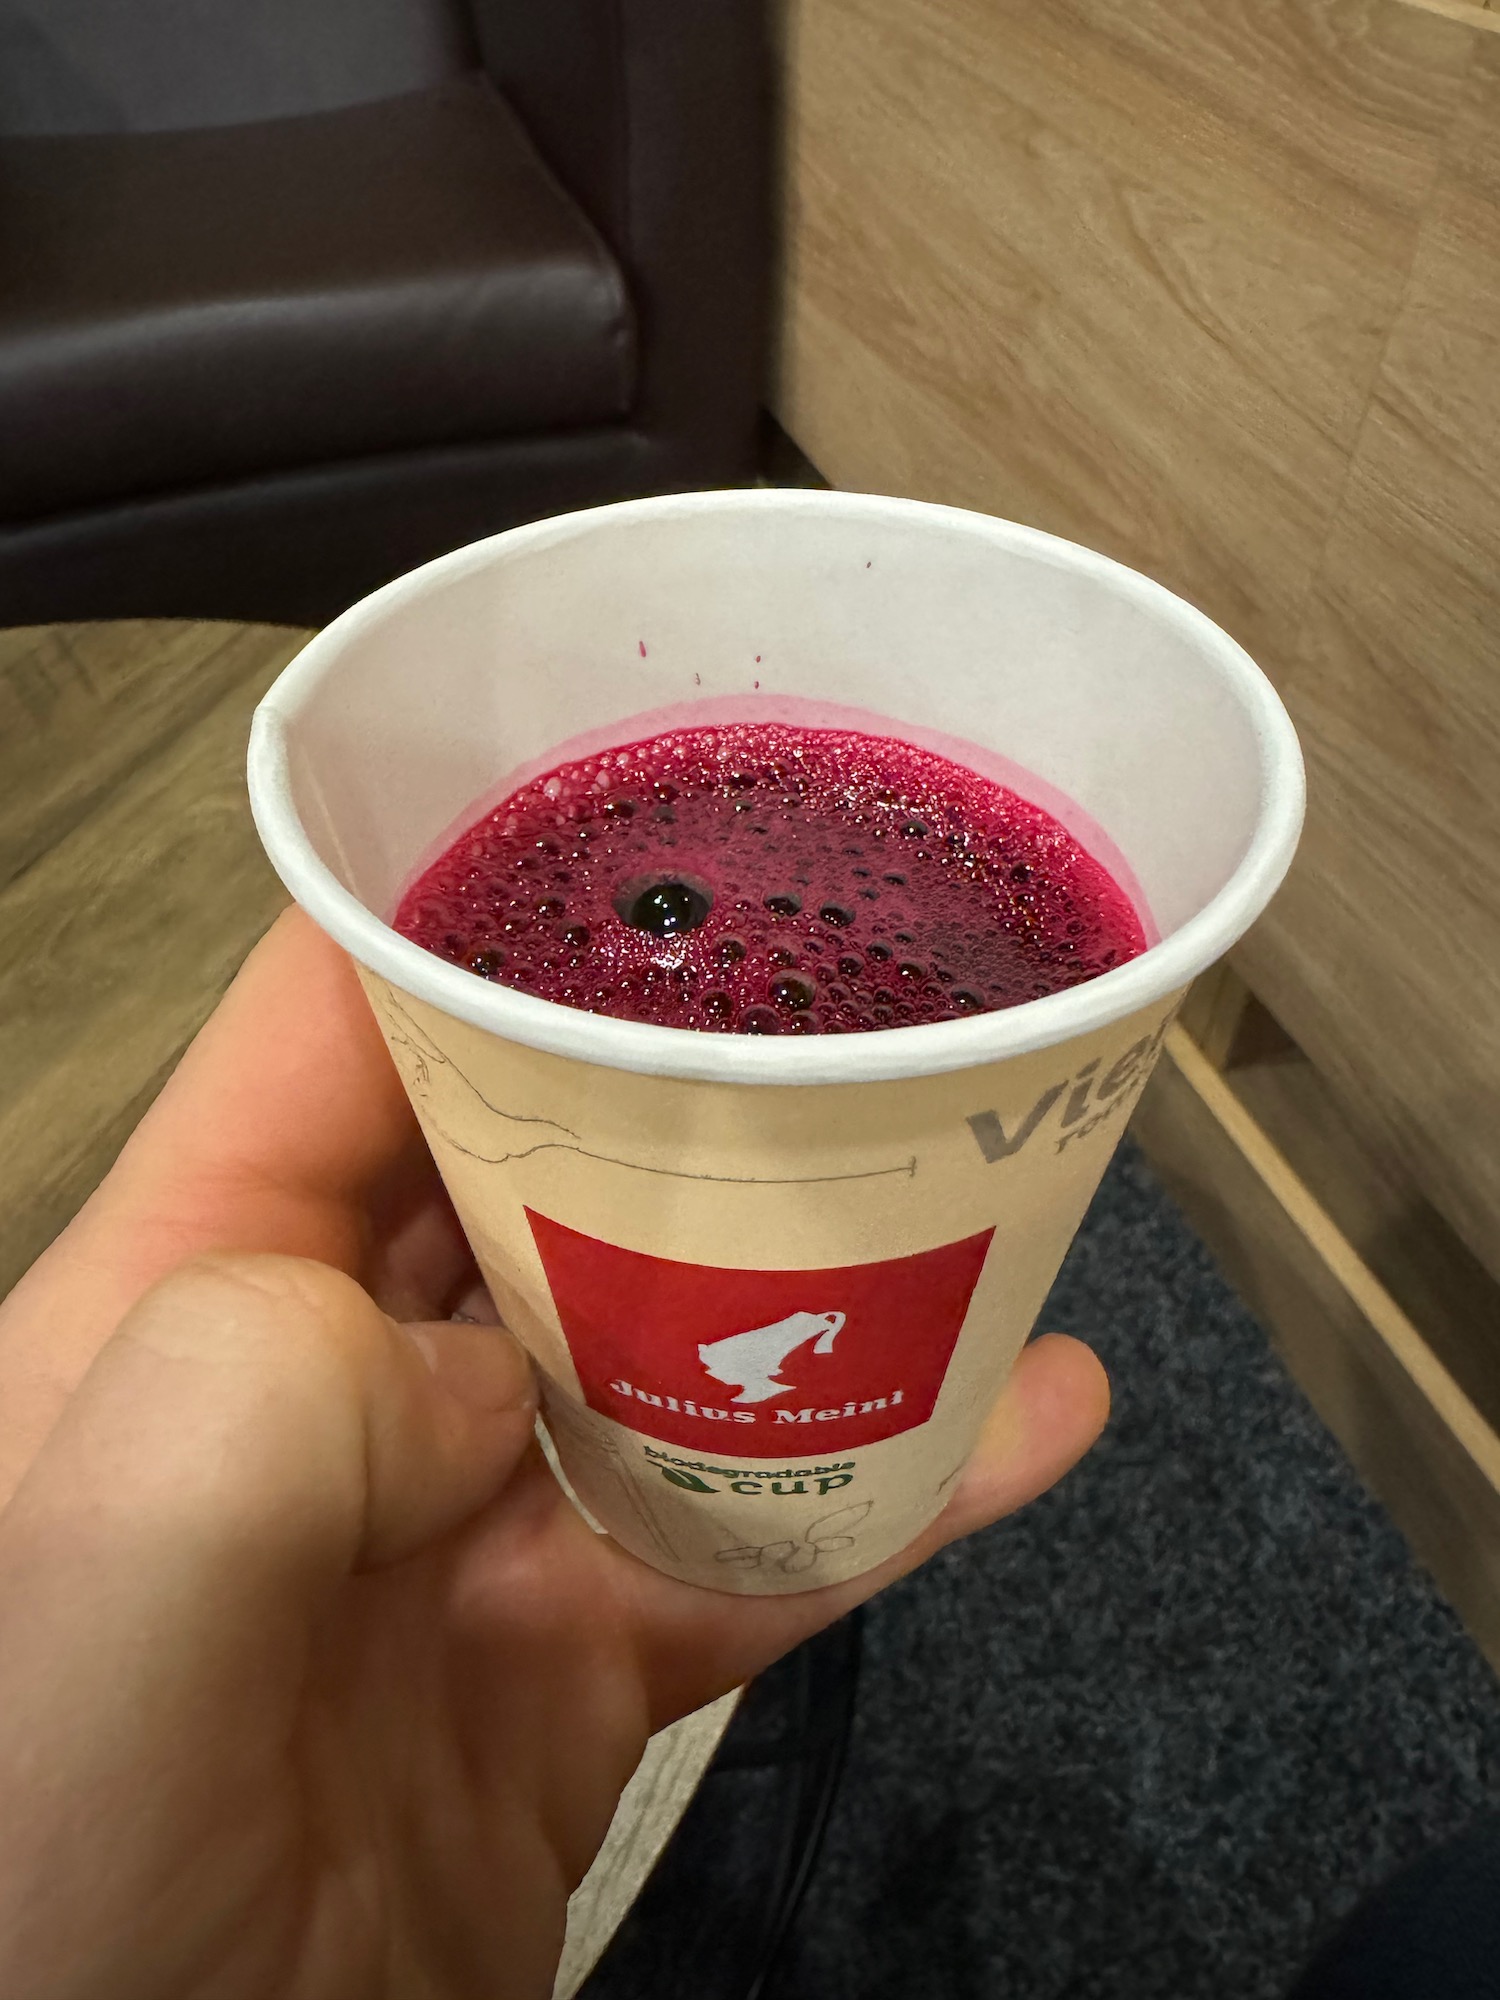 a hand holding a cup of red liquid